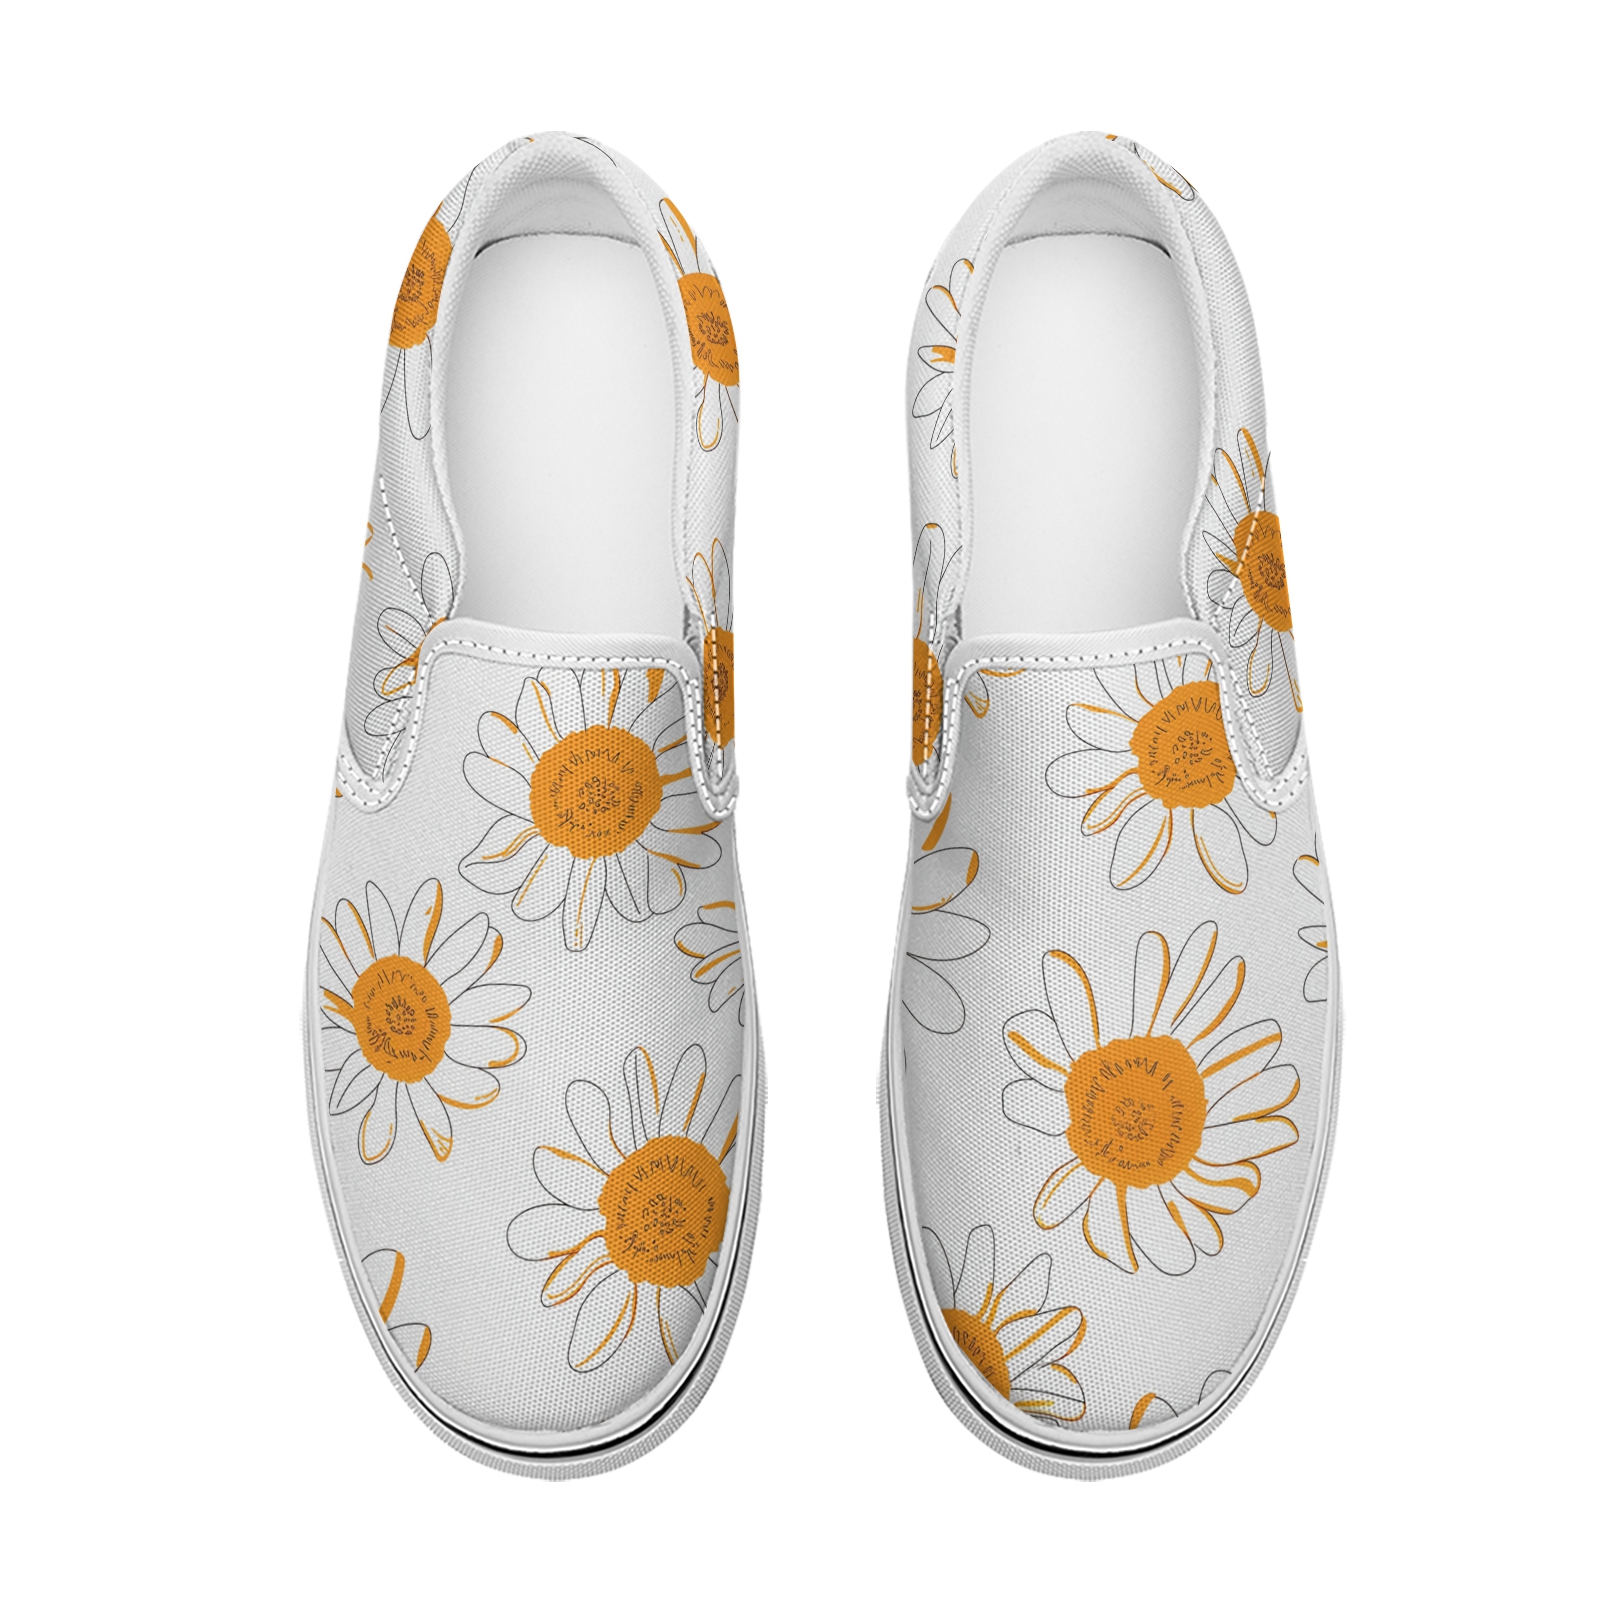 Women's fashion white and yellow daisy painted printed canvas sneakers low-top casual walking shoes classic comfortable flat fashion sneakers